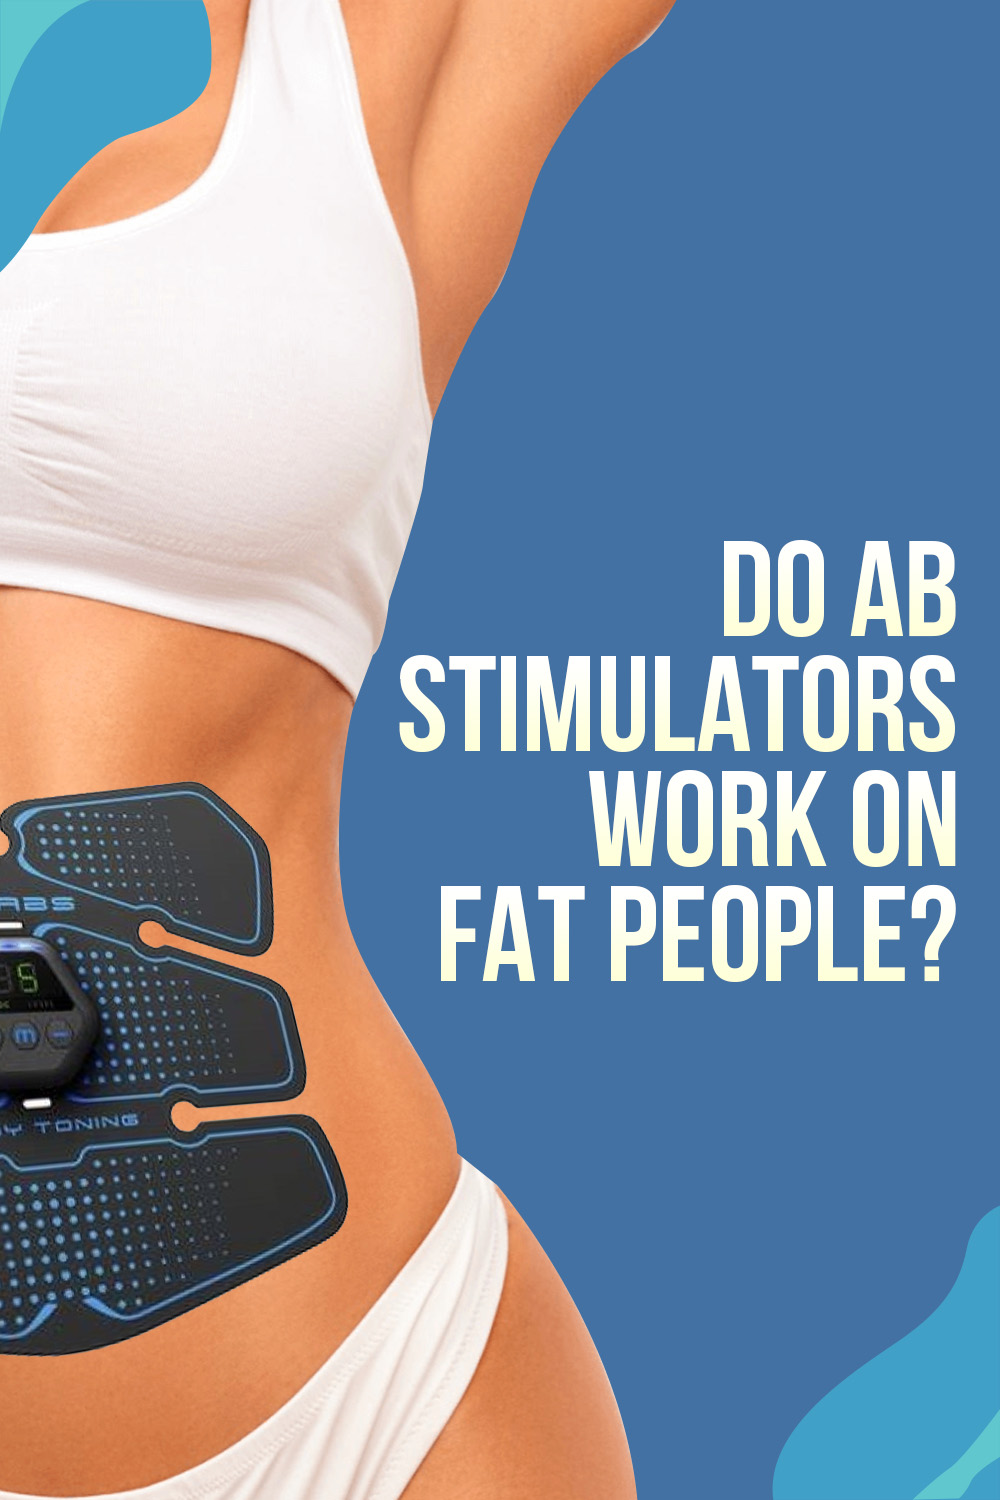 Does abdominal electrical muscle stimulation really work?